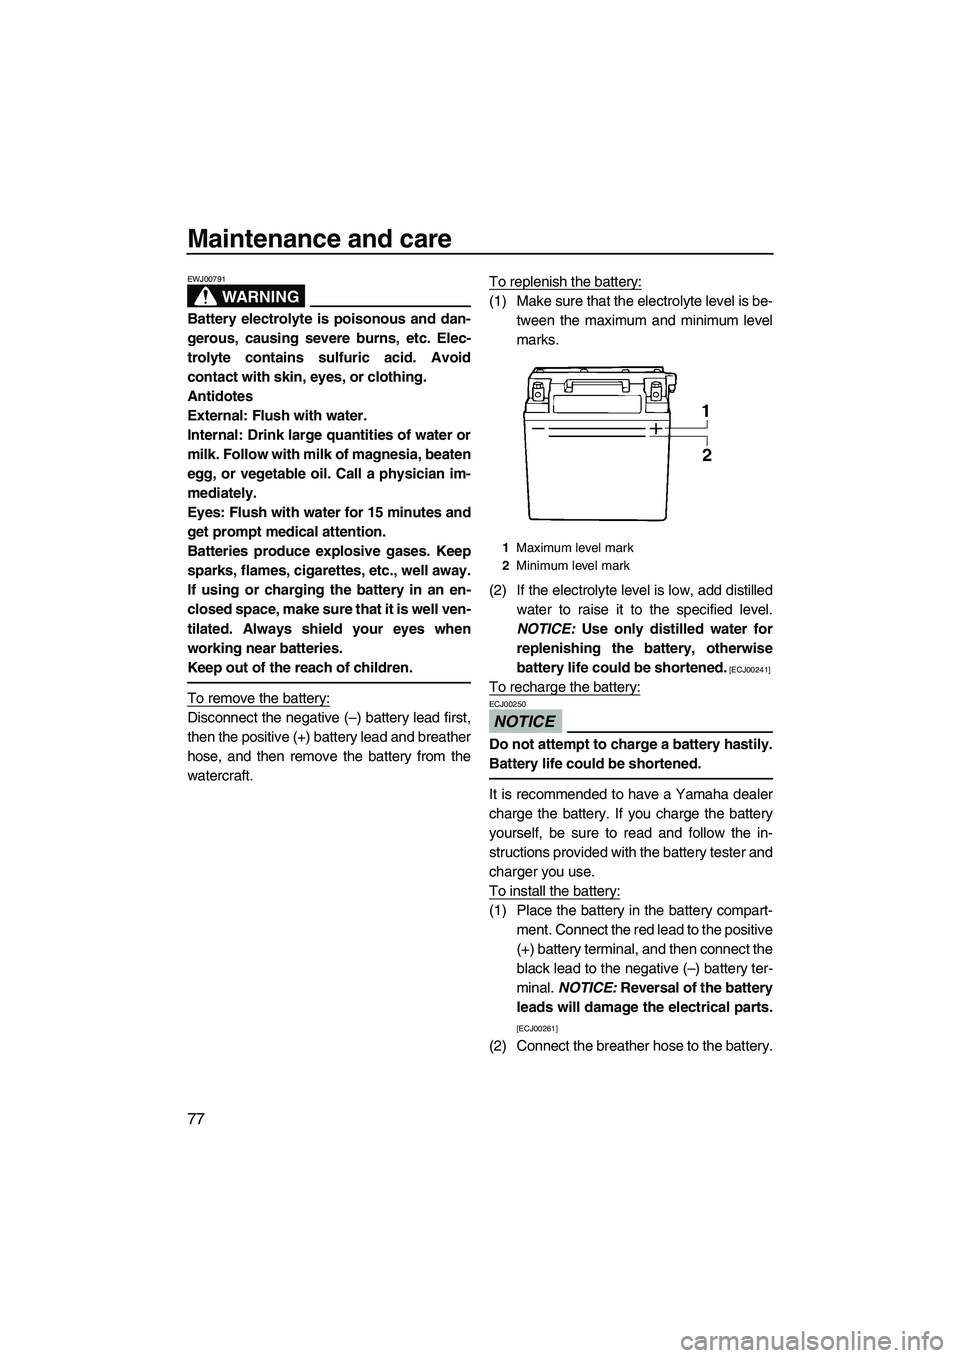 YAMAHA FZR 2009  Owners Manual Maintenance and care
77
WARNING
EWJ00791
Battery electrolyte is poisonous and dan-
gerous, causing severe burns, etc. Elec-
trolyte contains sulfuric acid. Avoid
contact with skin, eyes, or clothing.
